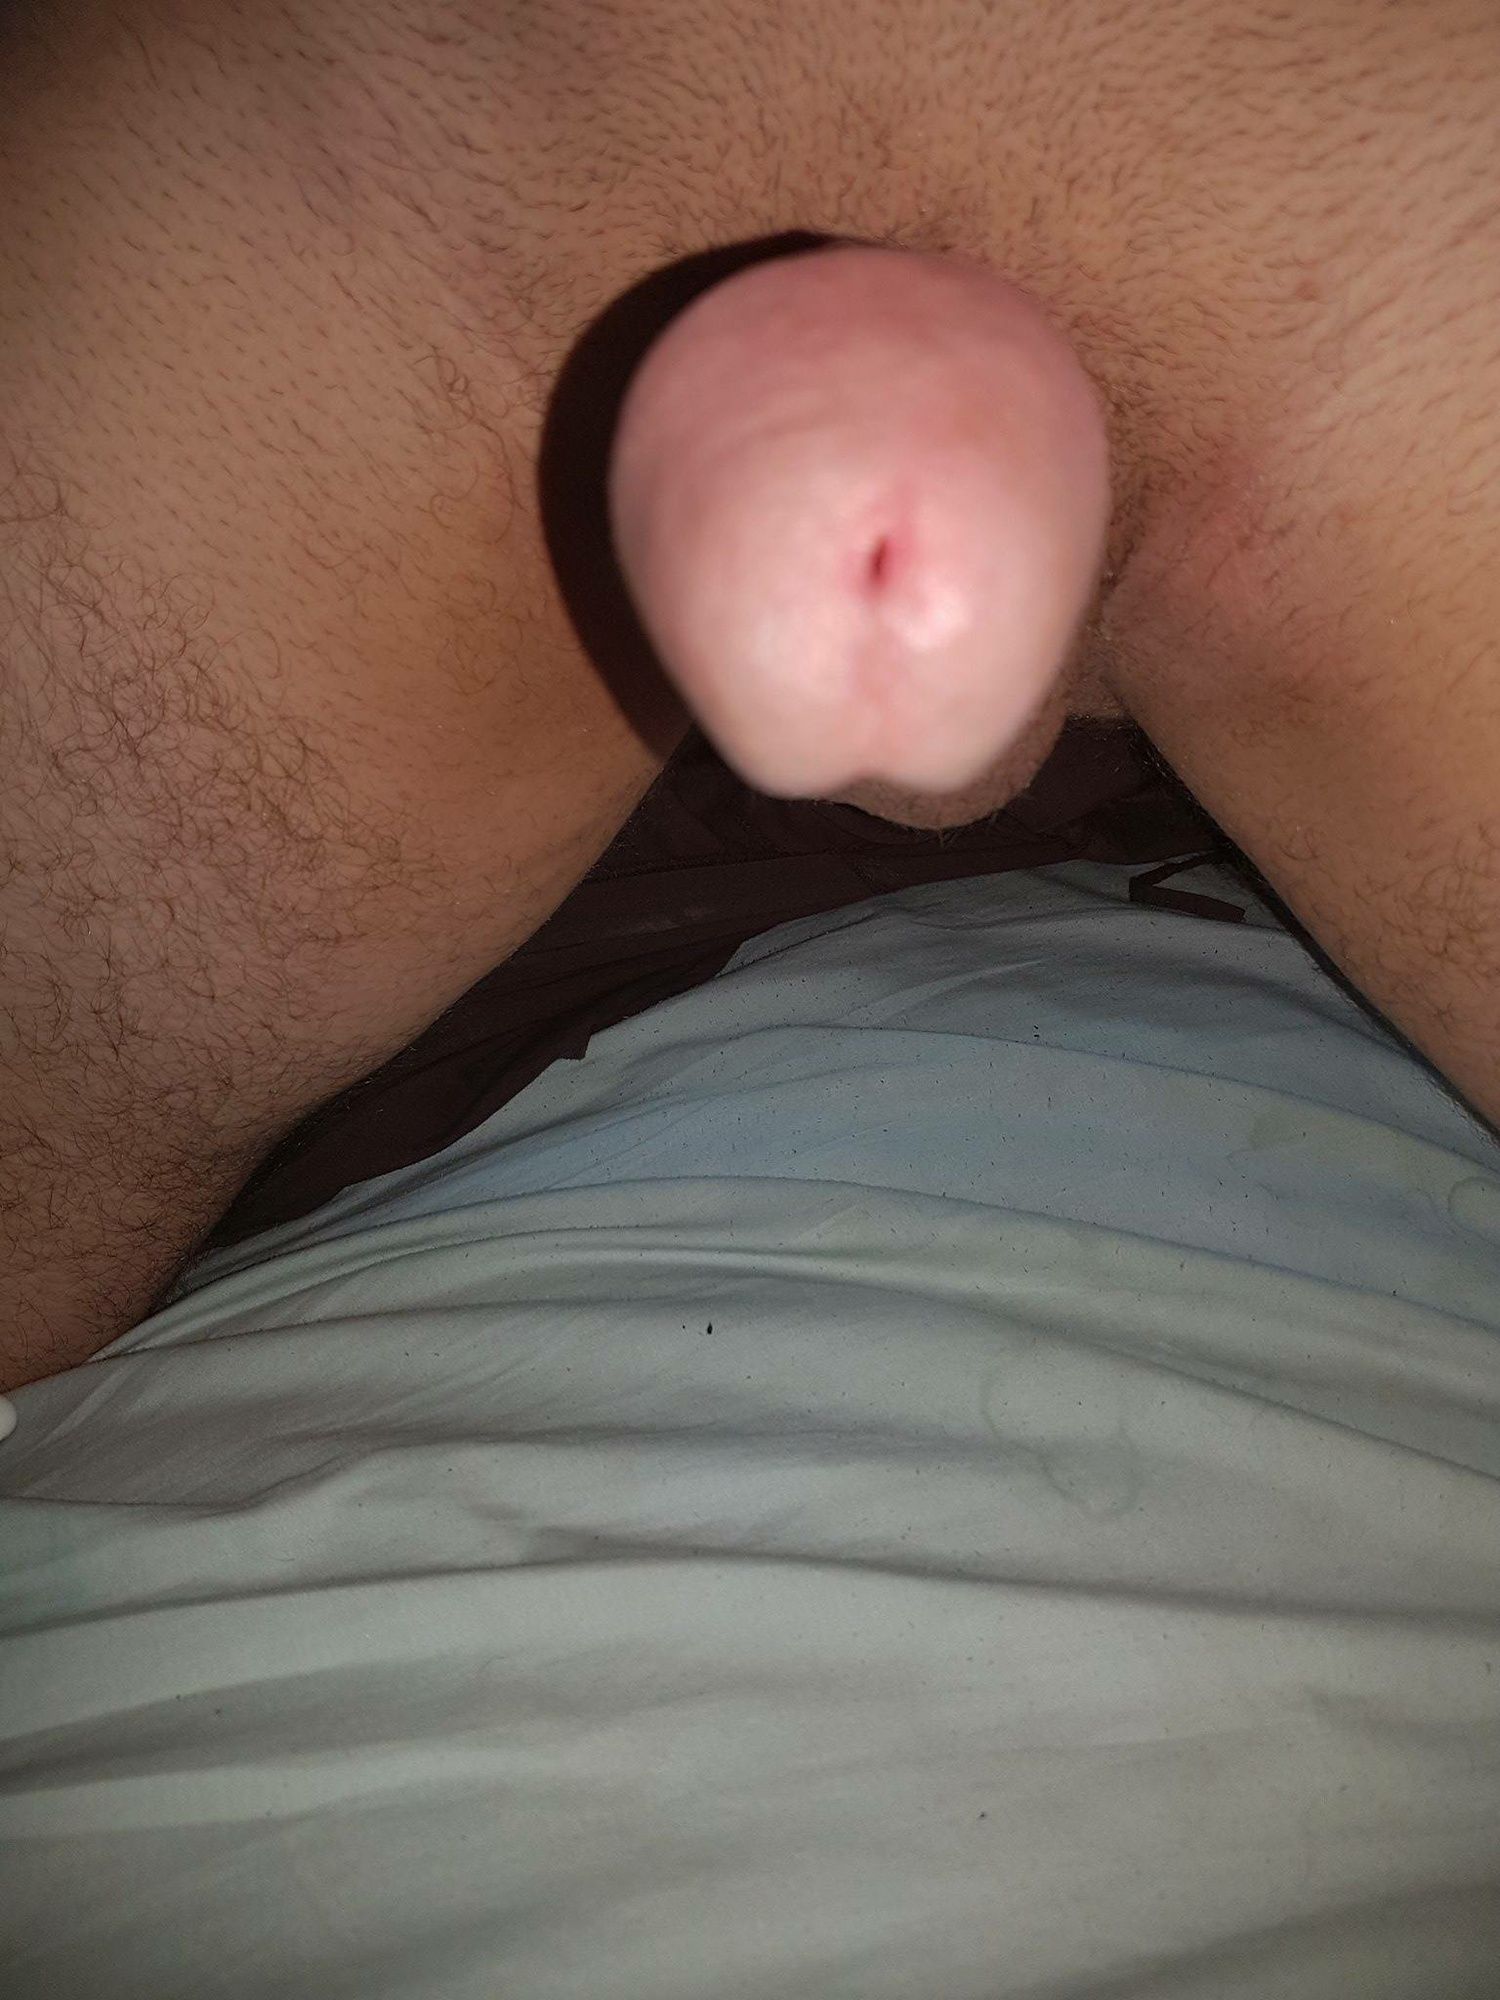 My cock for you  #2